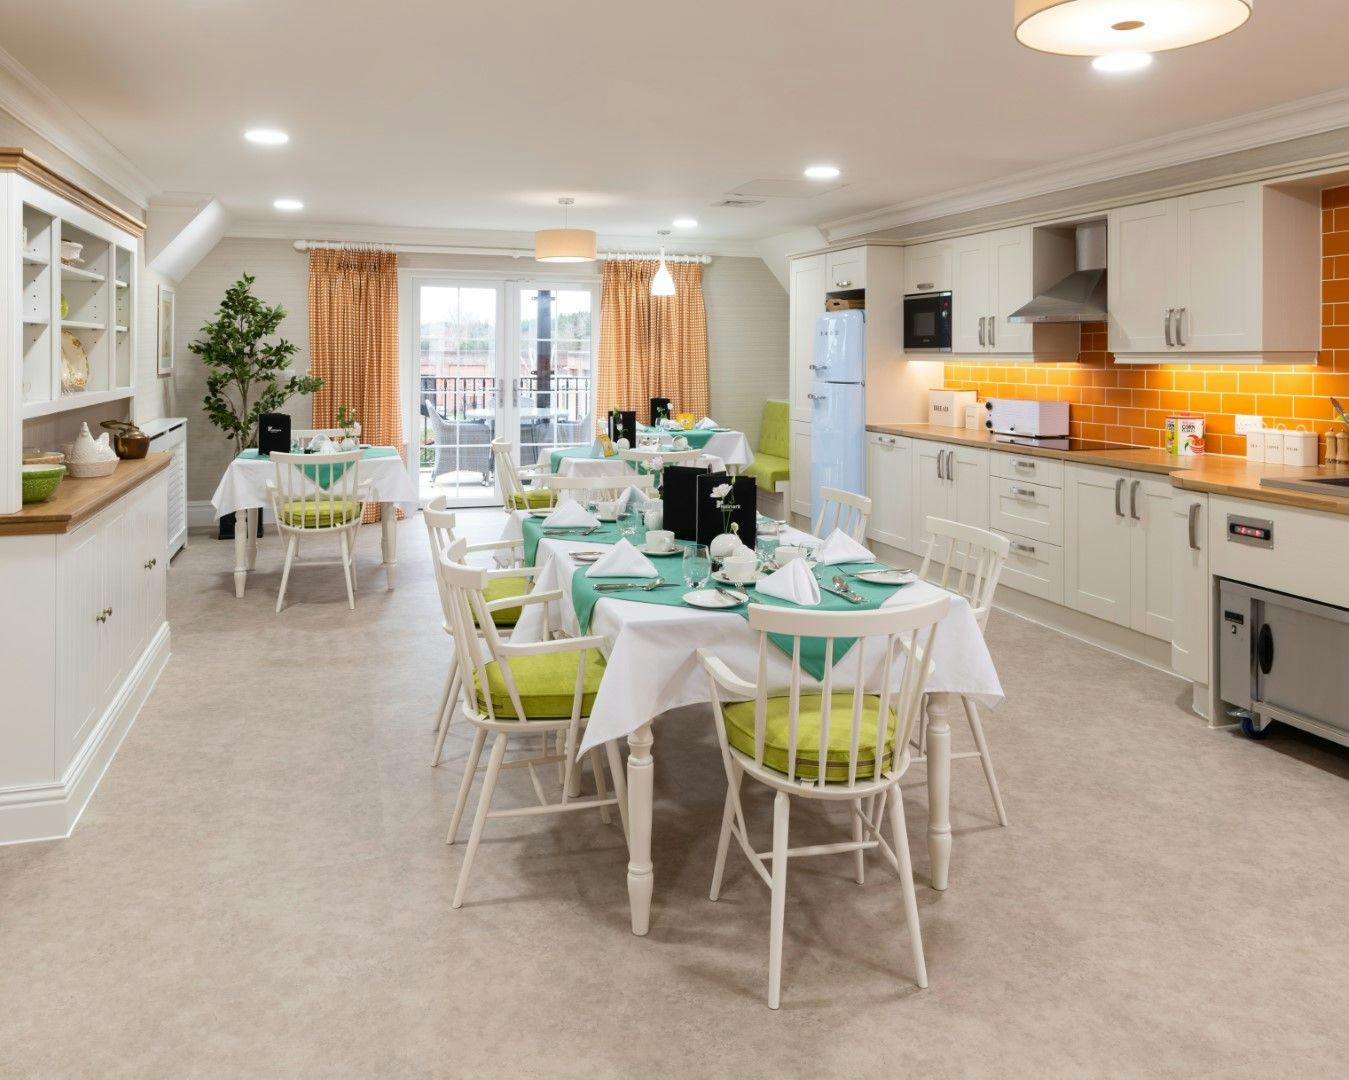 Dining Area at Henley Manor Care Home in Henley-on-Thames, South Oxfordshire